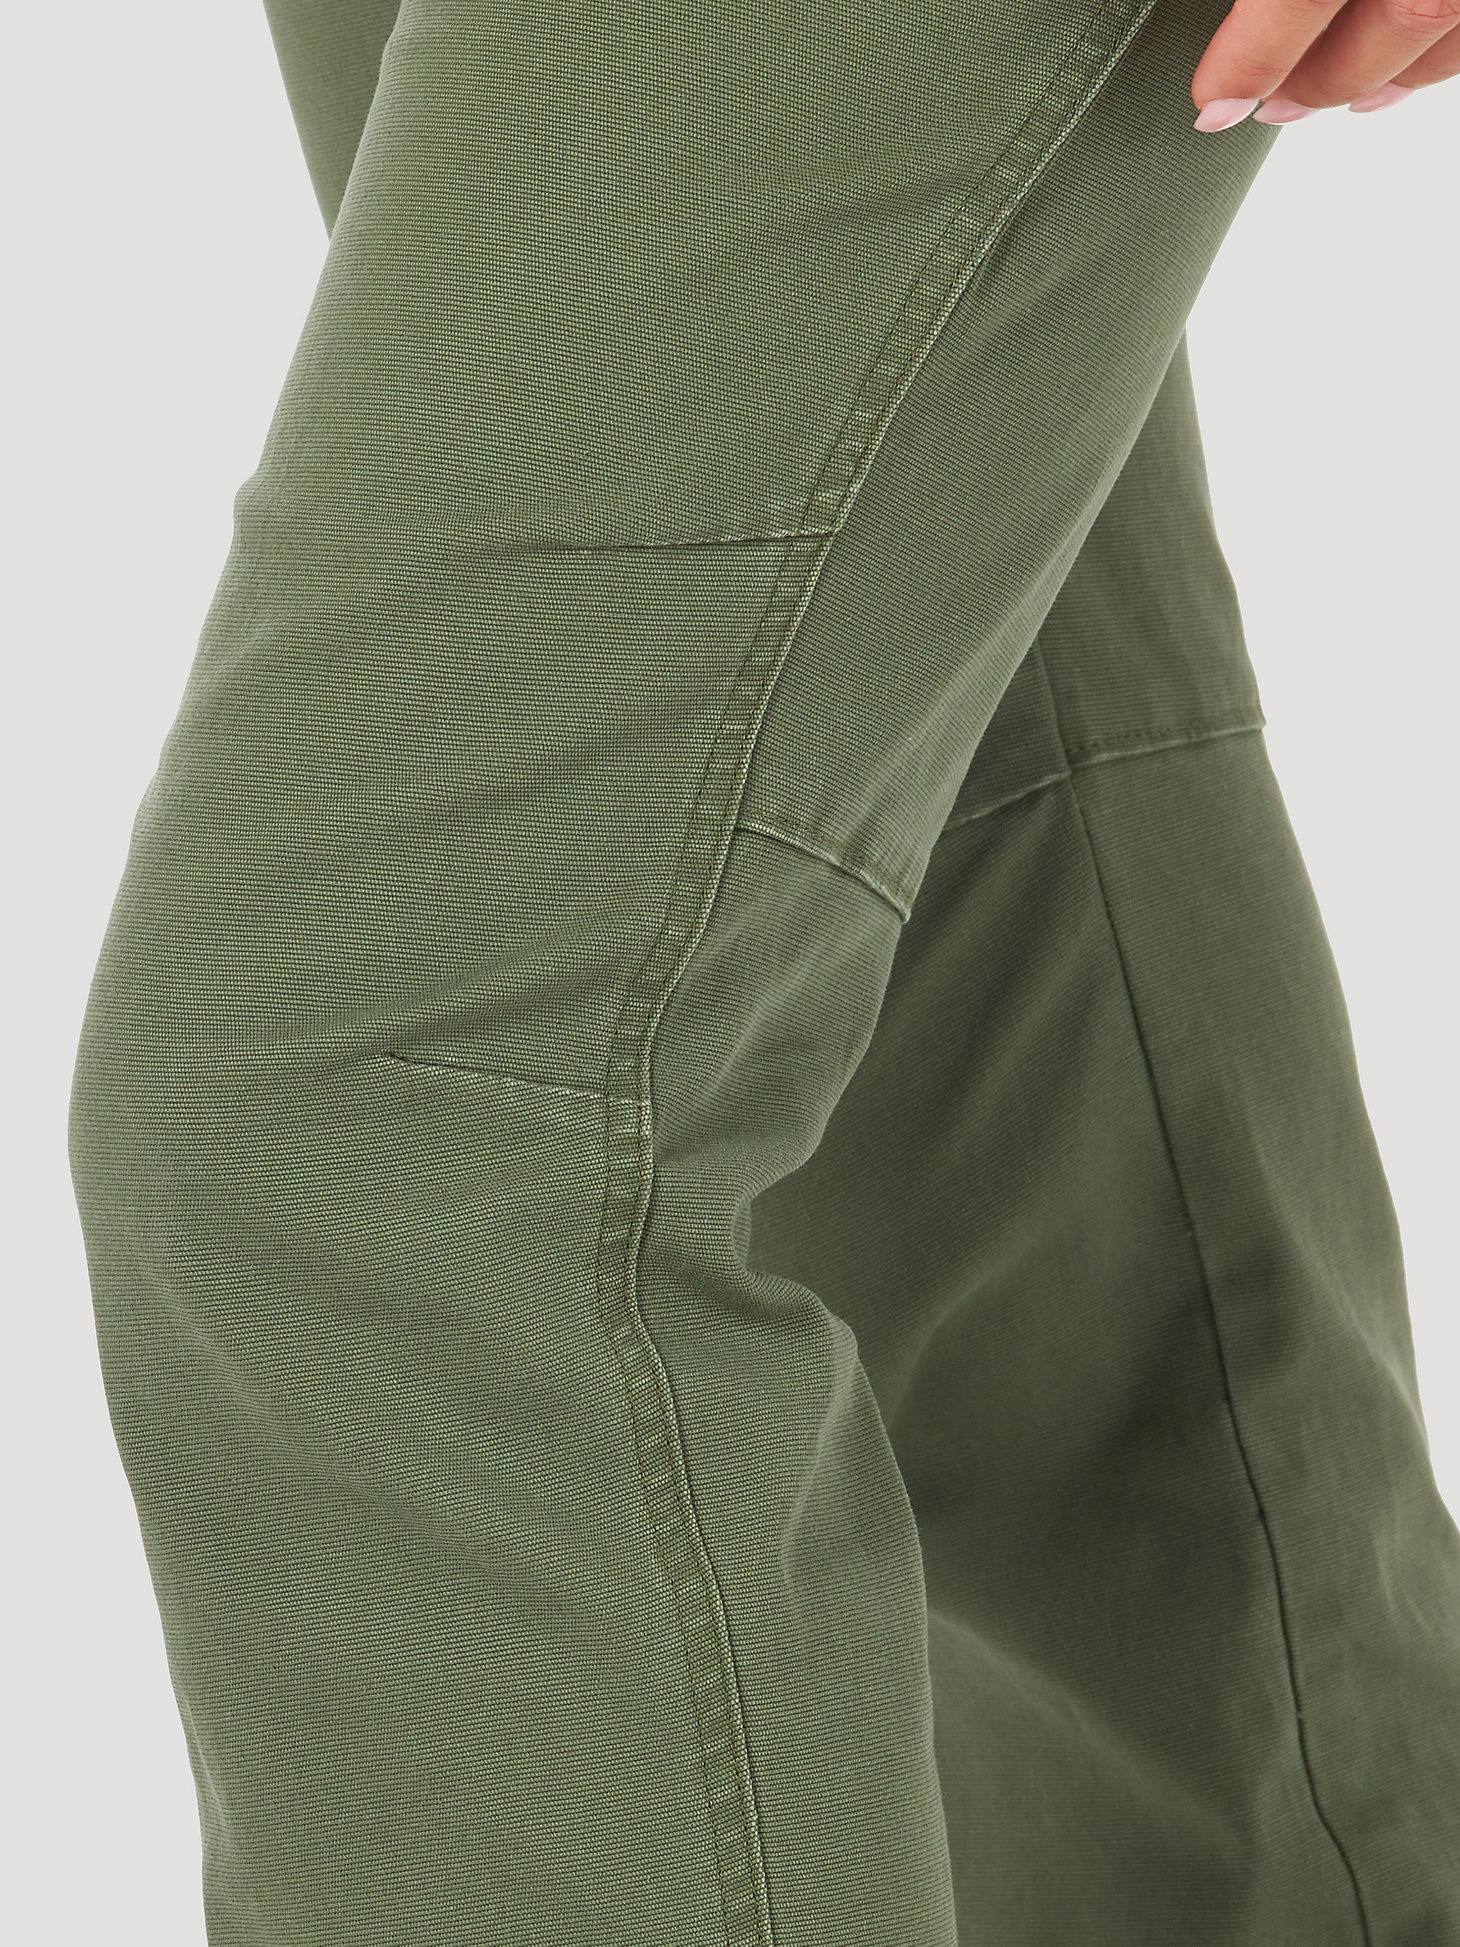 ATG By Wrangler™ Women's Canvas Pant in Olive alternative view 7